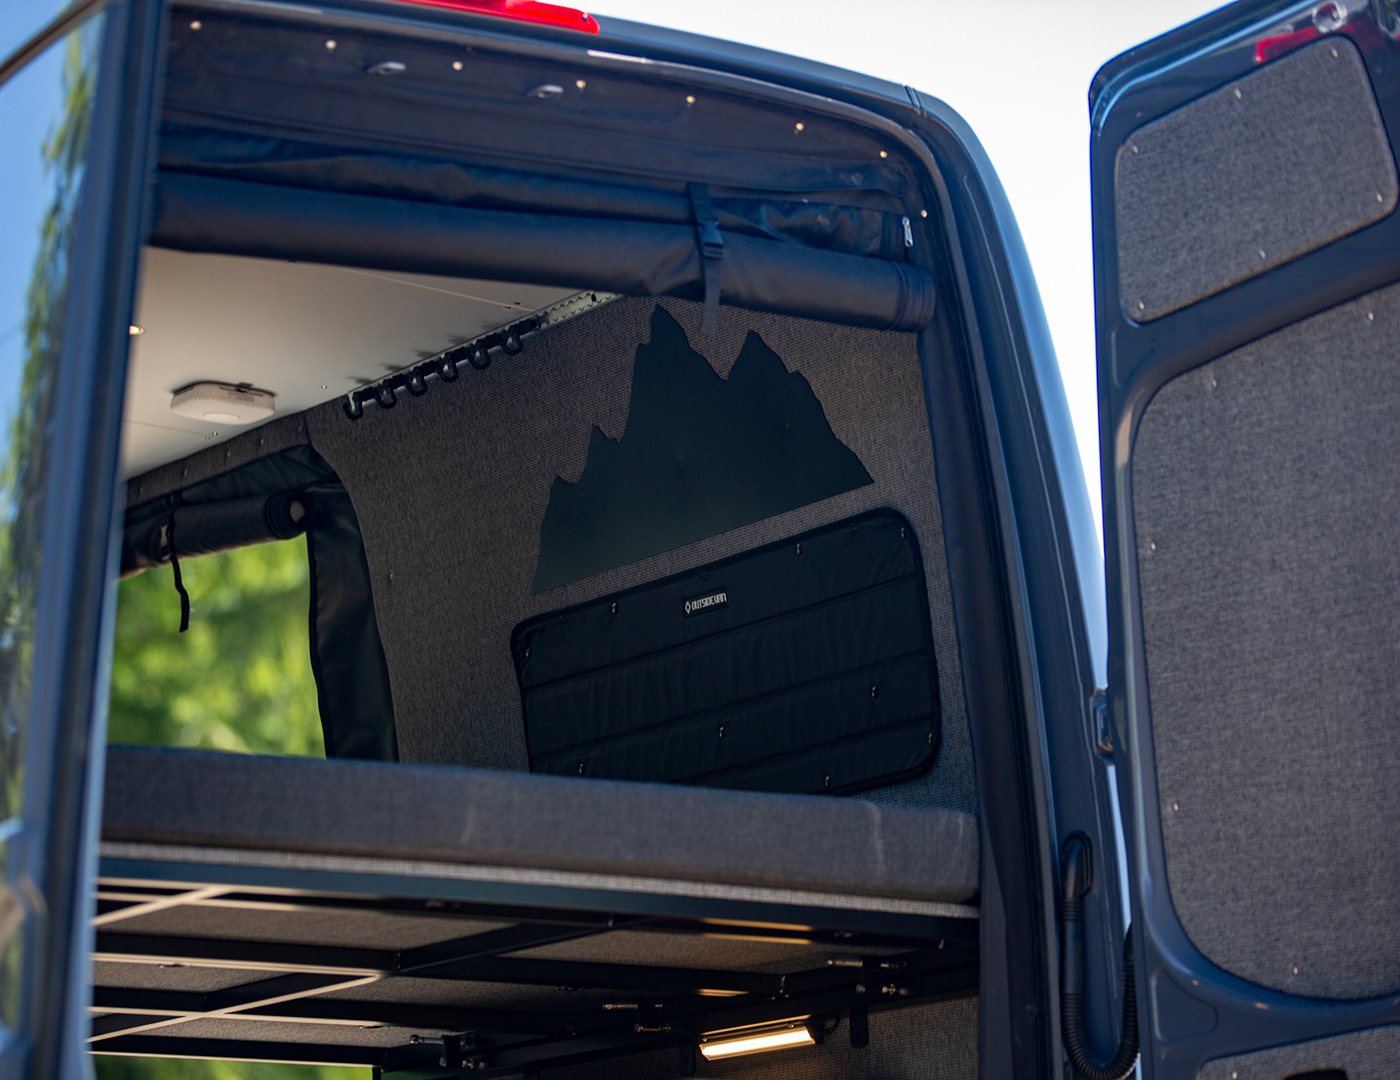 Detail image of converted 144 sprinter van with custom mountain range cut out above rear window